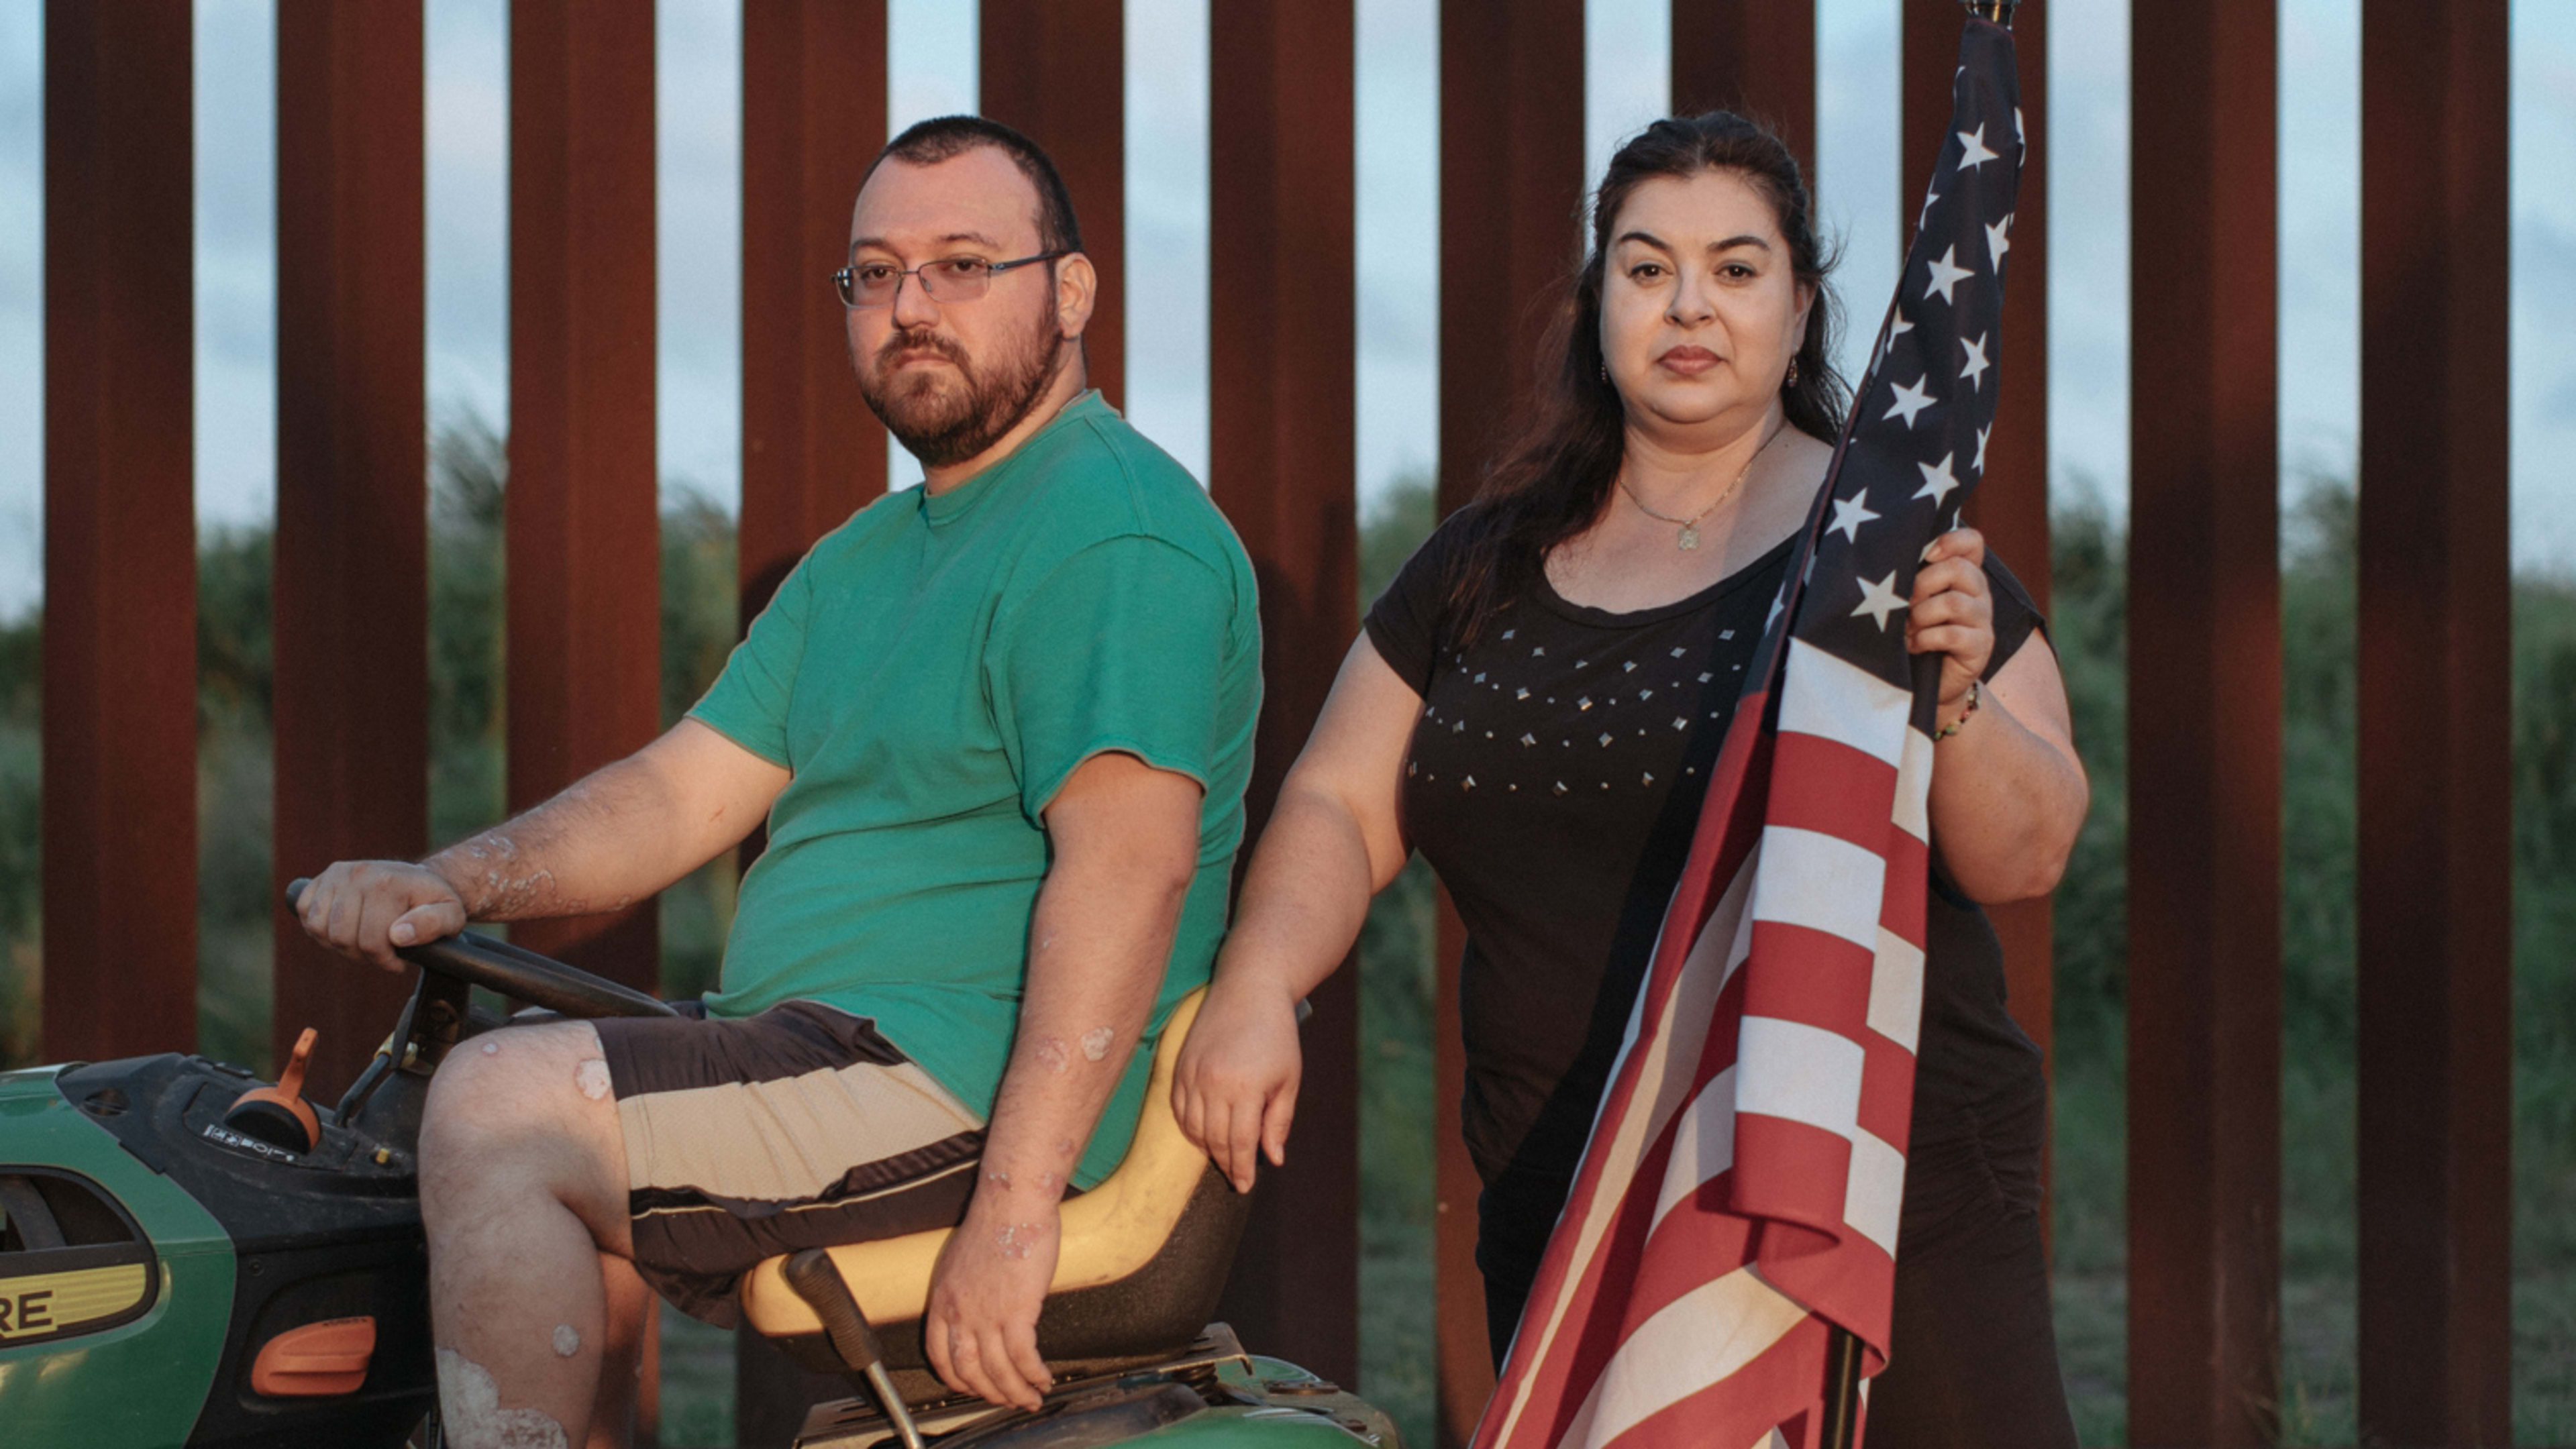 These photos of the U.S.-Mexico border show that reality is very different from the rhetoric